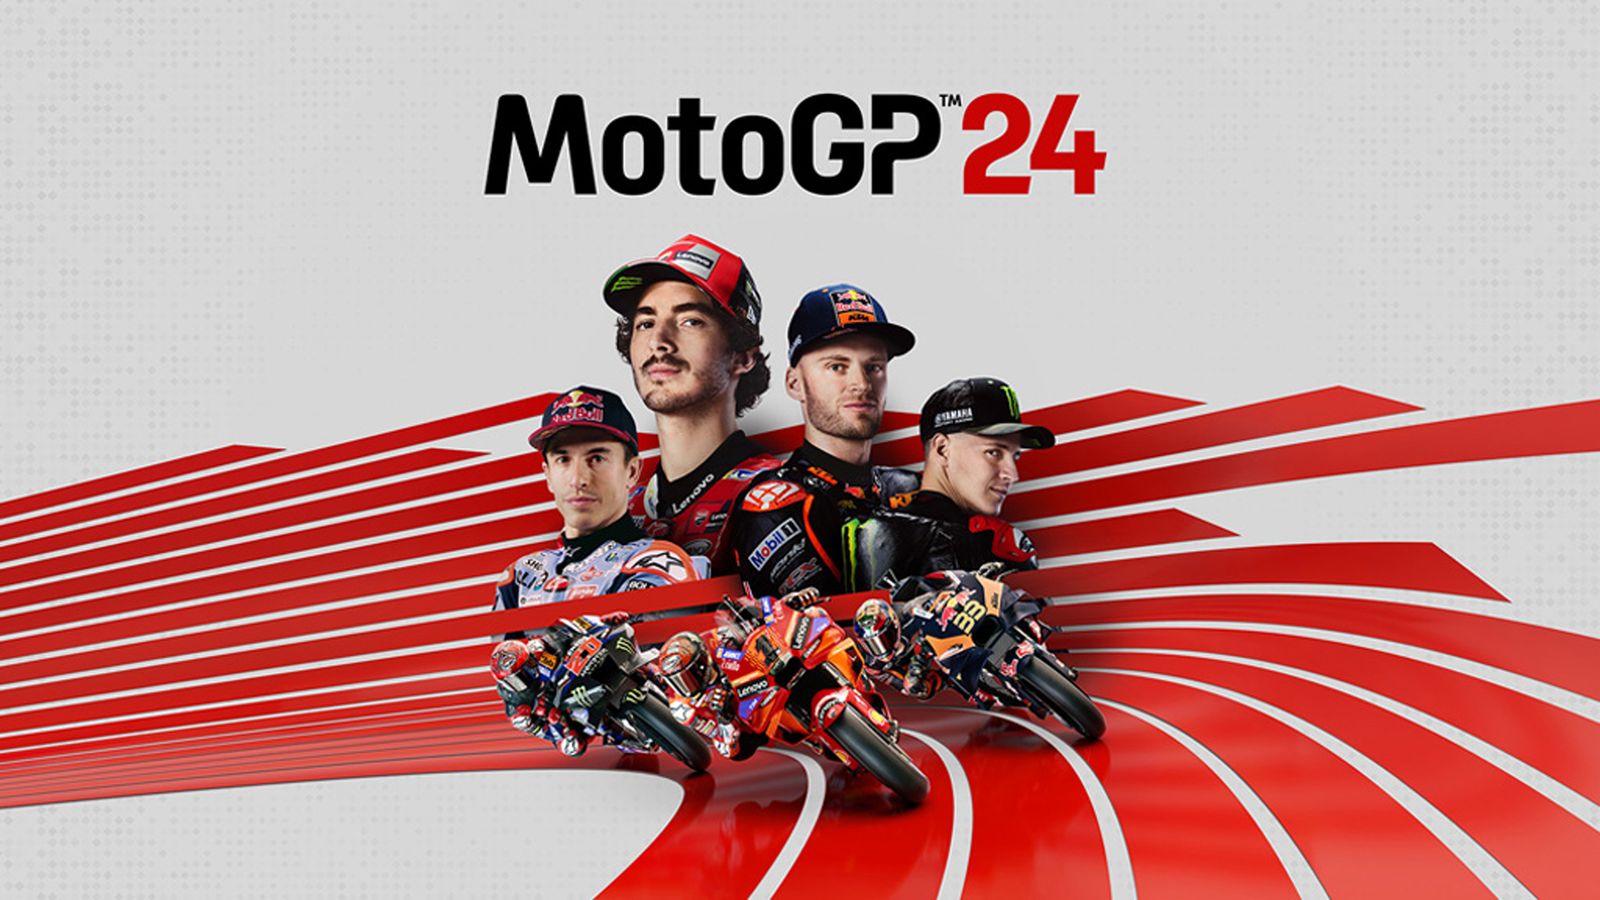 MotoGP 24 everything you need to know